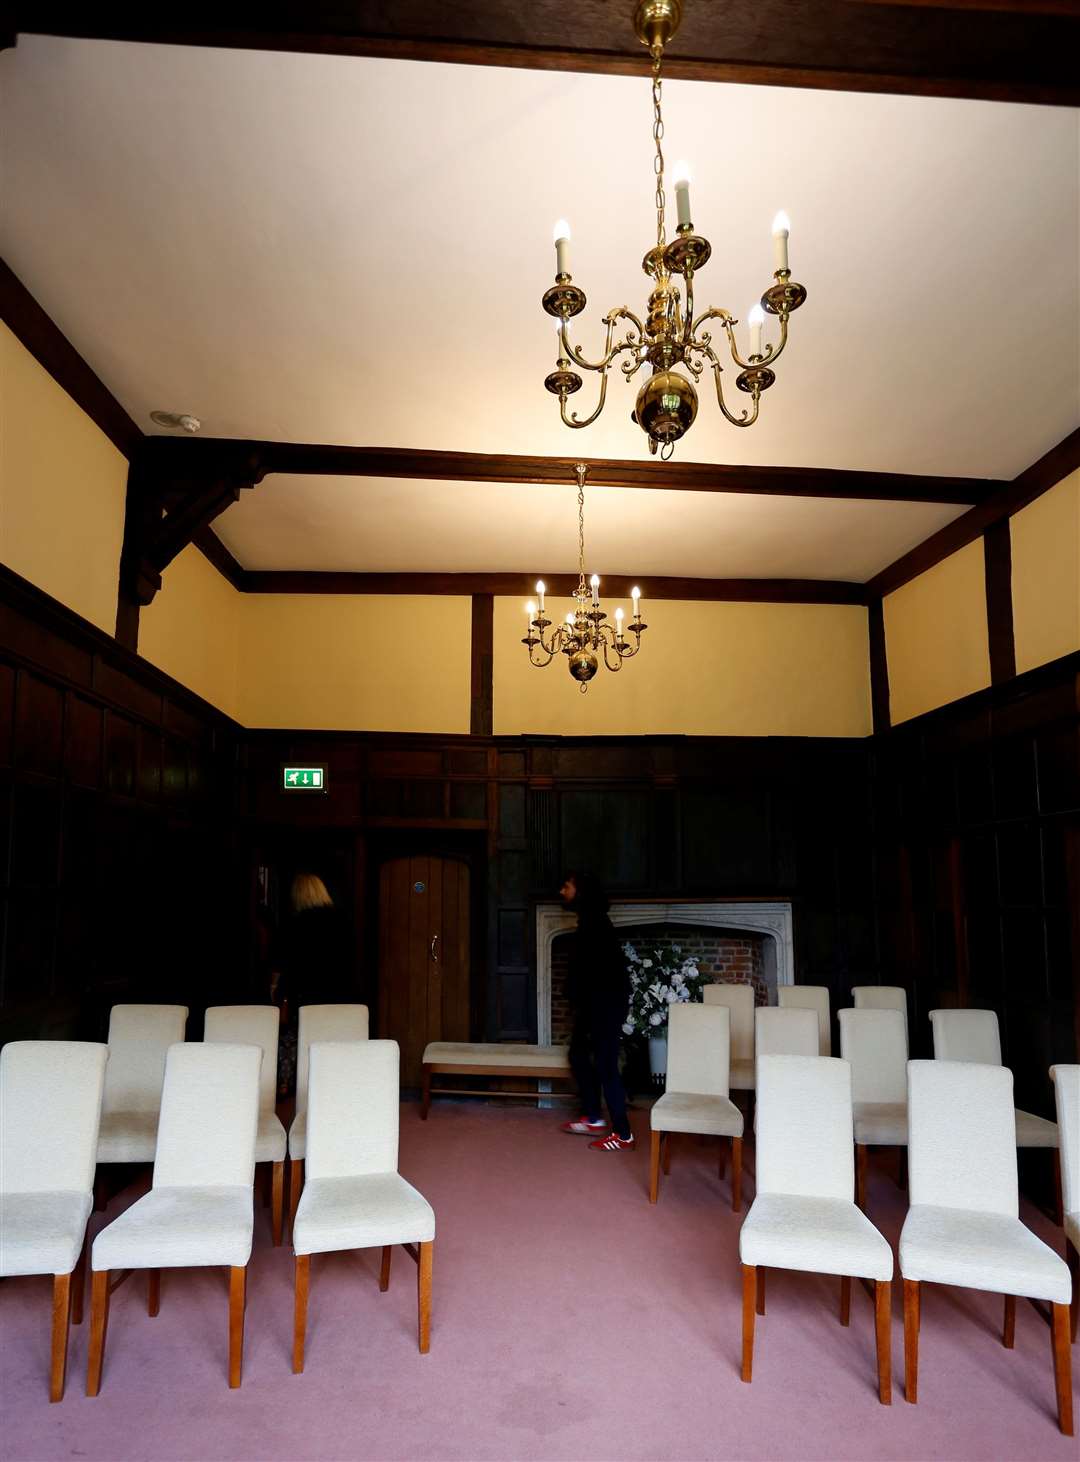 The Warham Room inside the Archbishop’s Palace